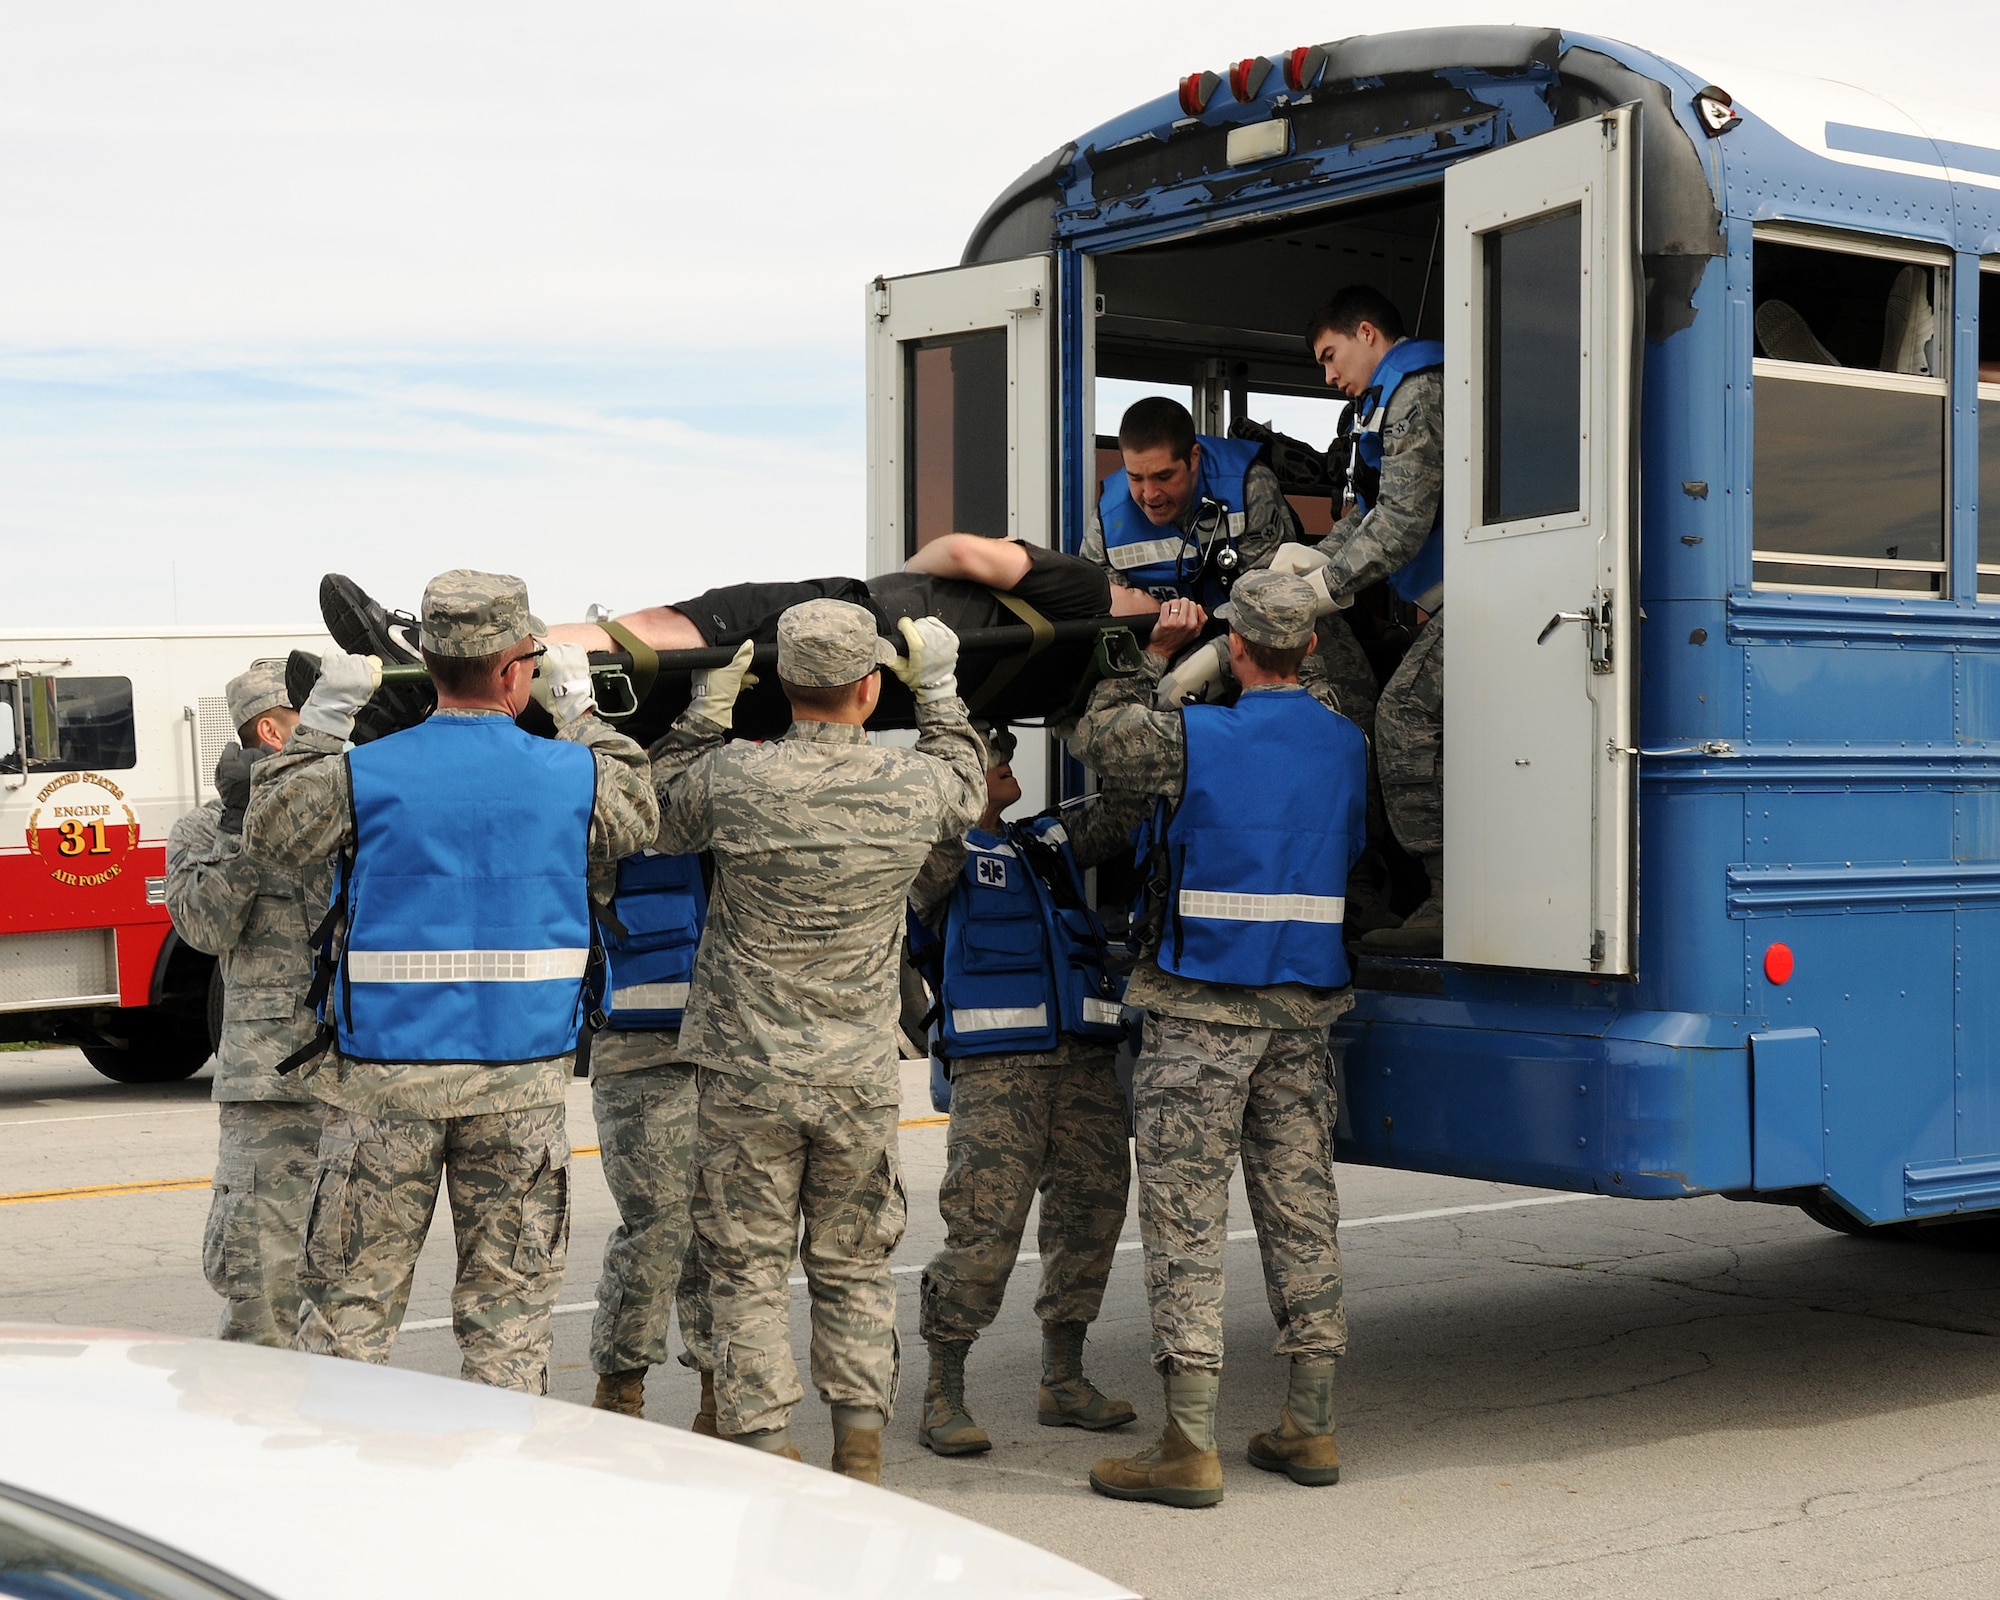 Wright-Patterson AFB first responders load a volunteer “victim” onto a vehicle for emergency transport during a May 2013 tornado exercise. Response action is expected of all personnel during the March 31 base-wide drill.